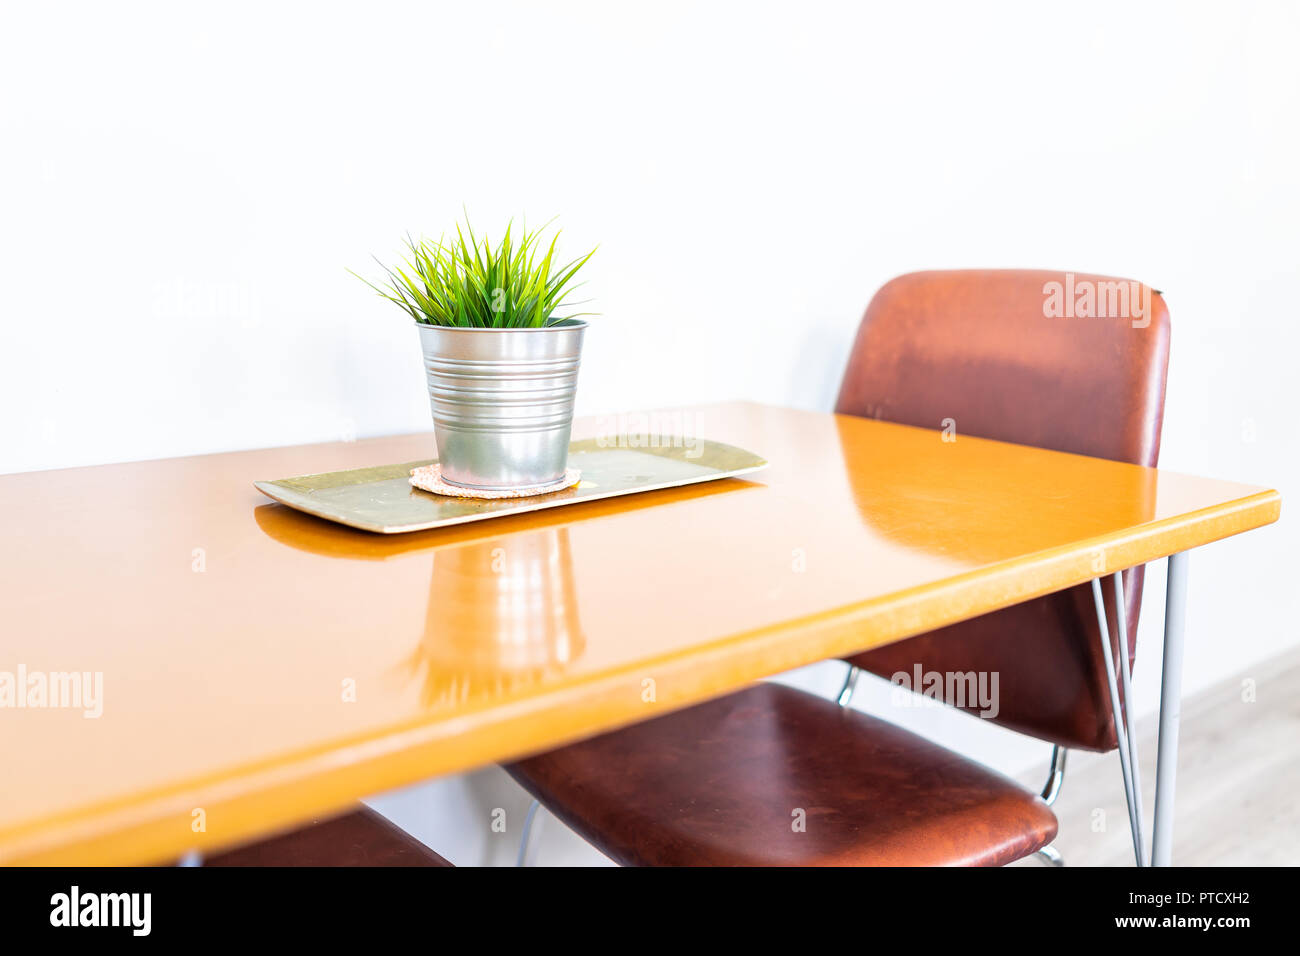 Green plant in small metal stainless steel modern flowerpot on wooden table, chairs in minimalist staged model house interior with bright light Stock Photo